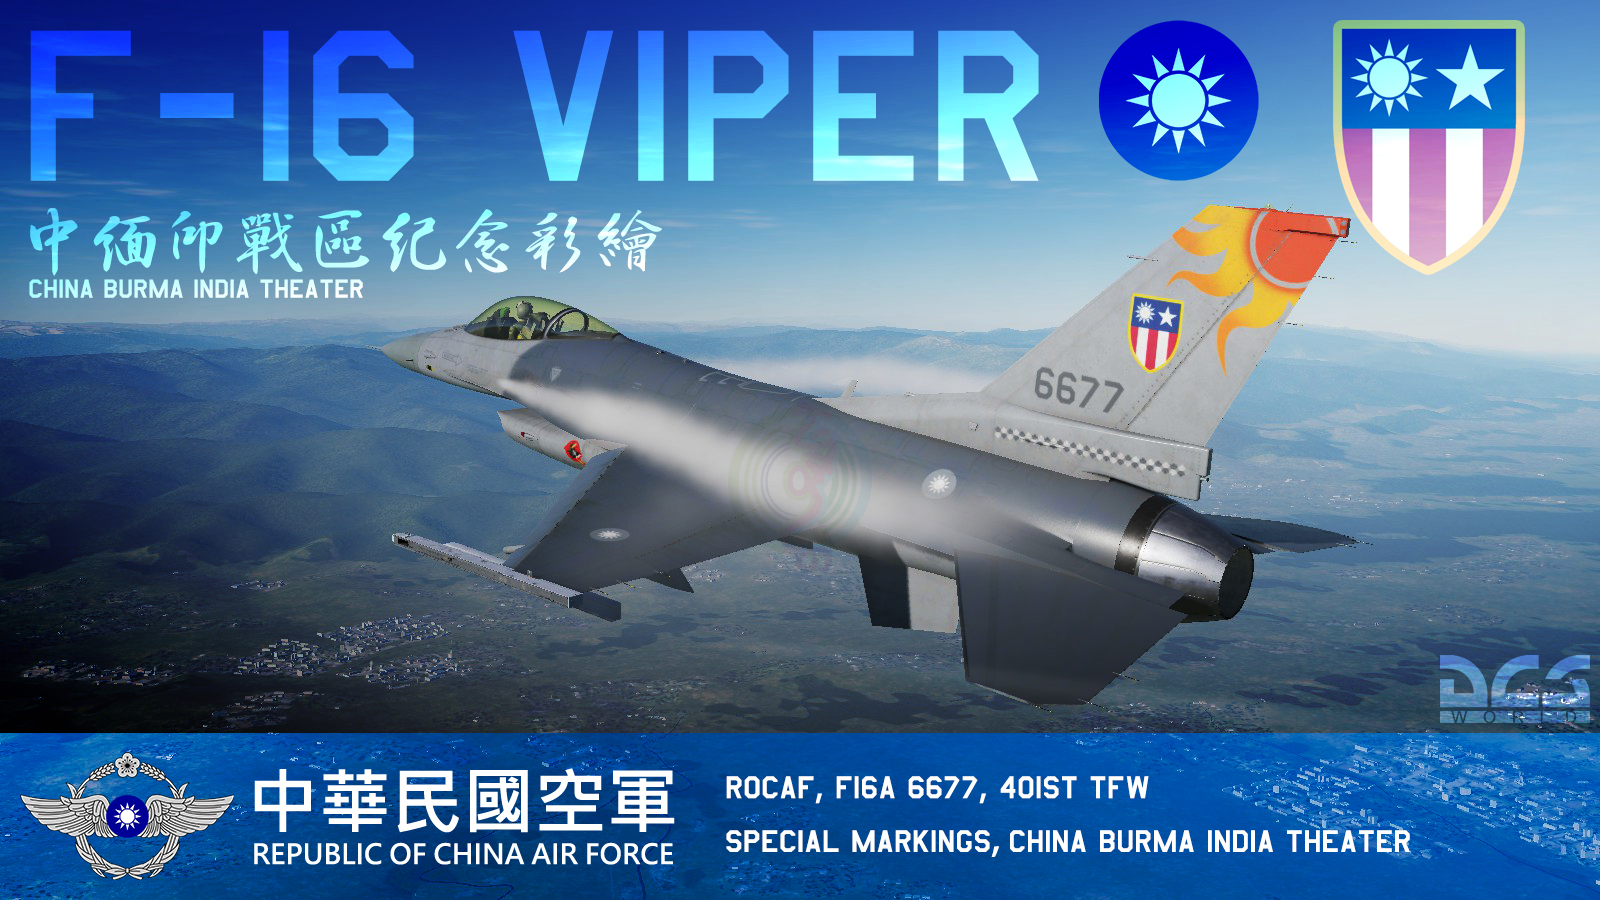 [Ver.4.0]ROCAF, F16A 6677, 401st TFW, 2015, "China Burma India Theater"